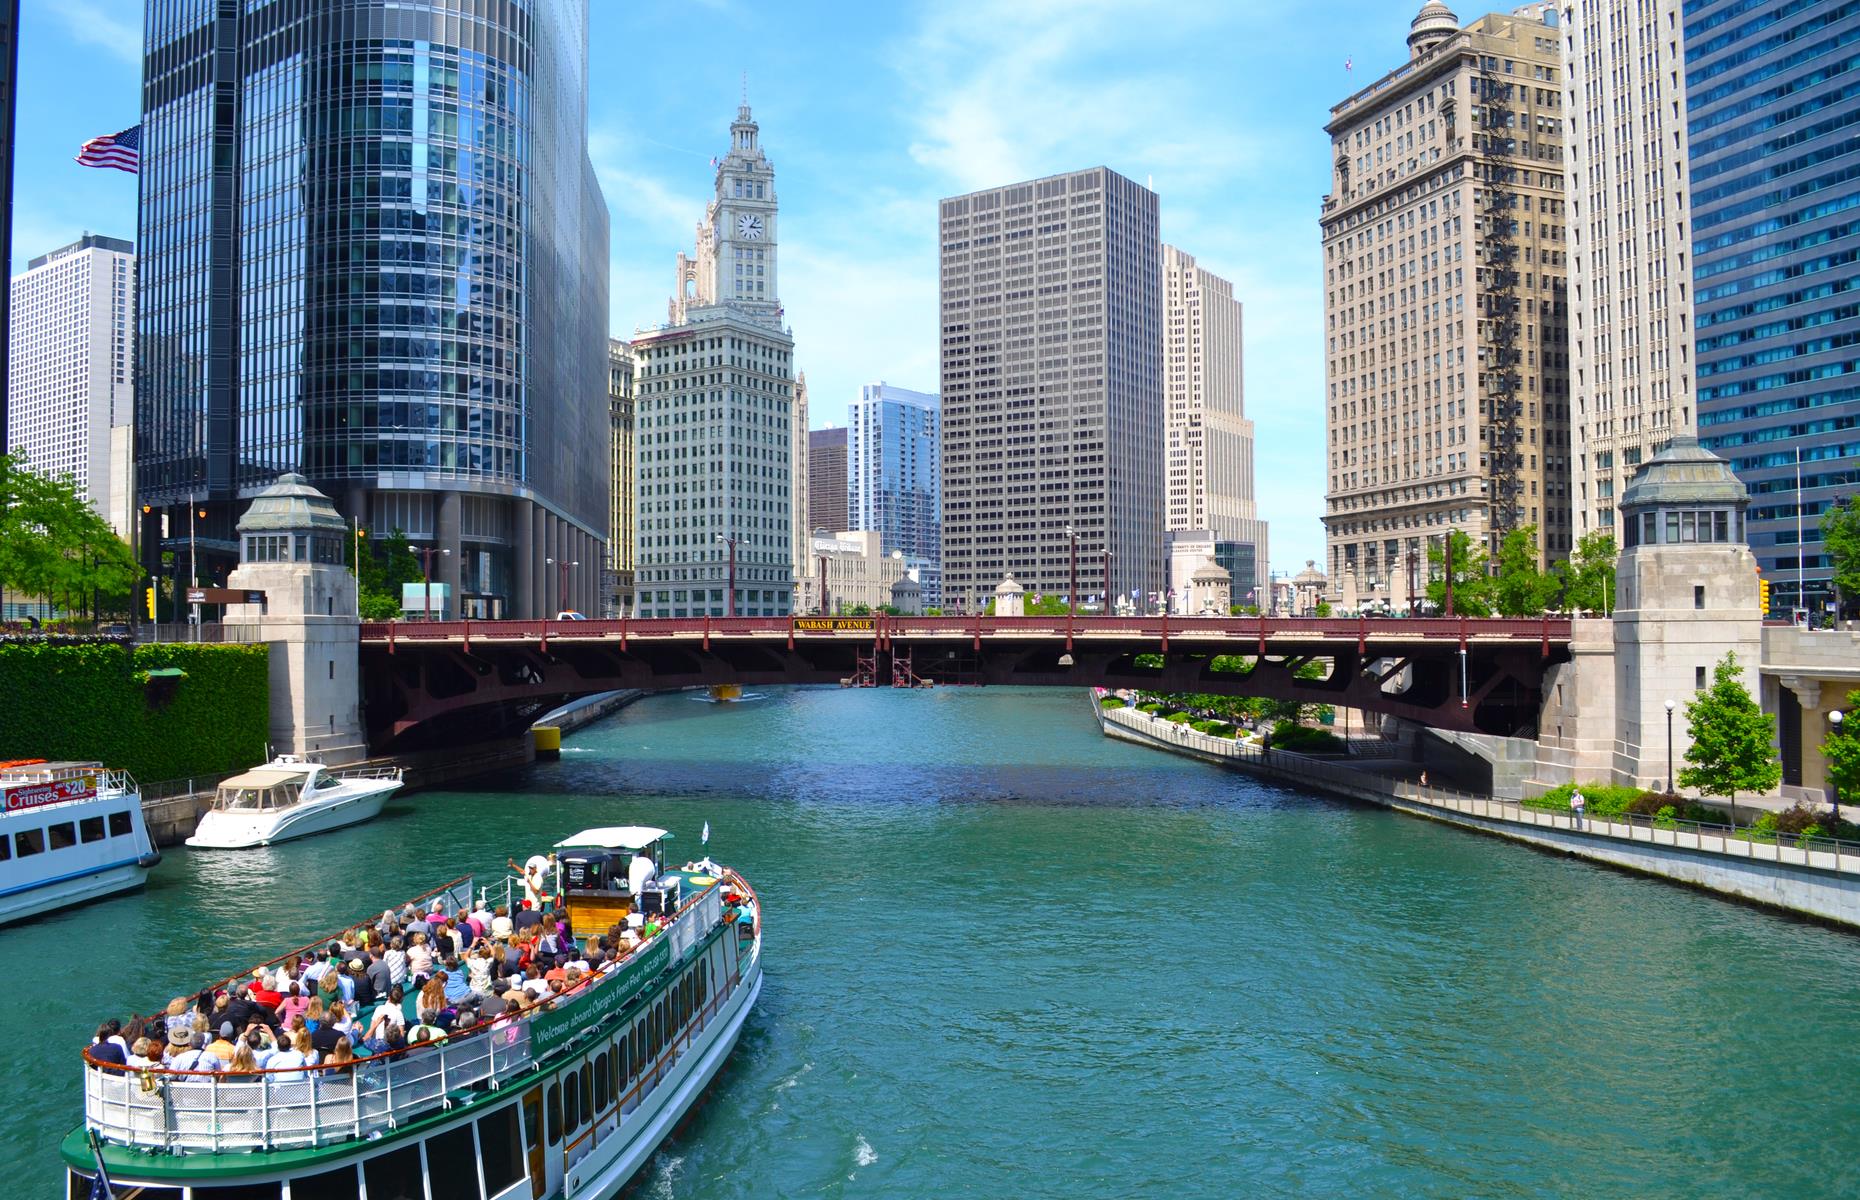 <p>Chicago is famous for deep-dish pizza, the blues and, depending on your age, possibly the 1980 <em>Blues Brothers</em> movie. Above all else (literally), it’s famous for its architecture. Get to know the birthplace of the skyscraper on a city river cruise with the <a href="https://www.architecture.org/tours/detail/chicago-architecture-foundation-center-river-cruise-aboard-chicagos-first-lady/">Chicago Architecture Center</a>. Volunteer docent guides, who know the buildings brick by steel rod, will point out the Willis Tower (the city’s tallest), Art Deco styles like 333 North Michigan and the Spanish Colonial Revival–style Wrigley Building.</p>